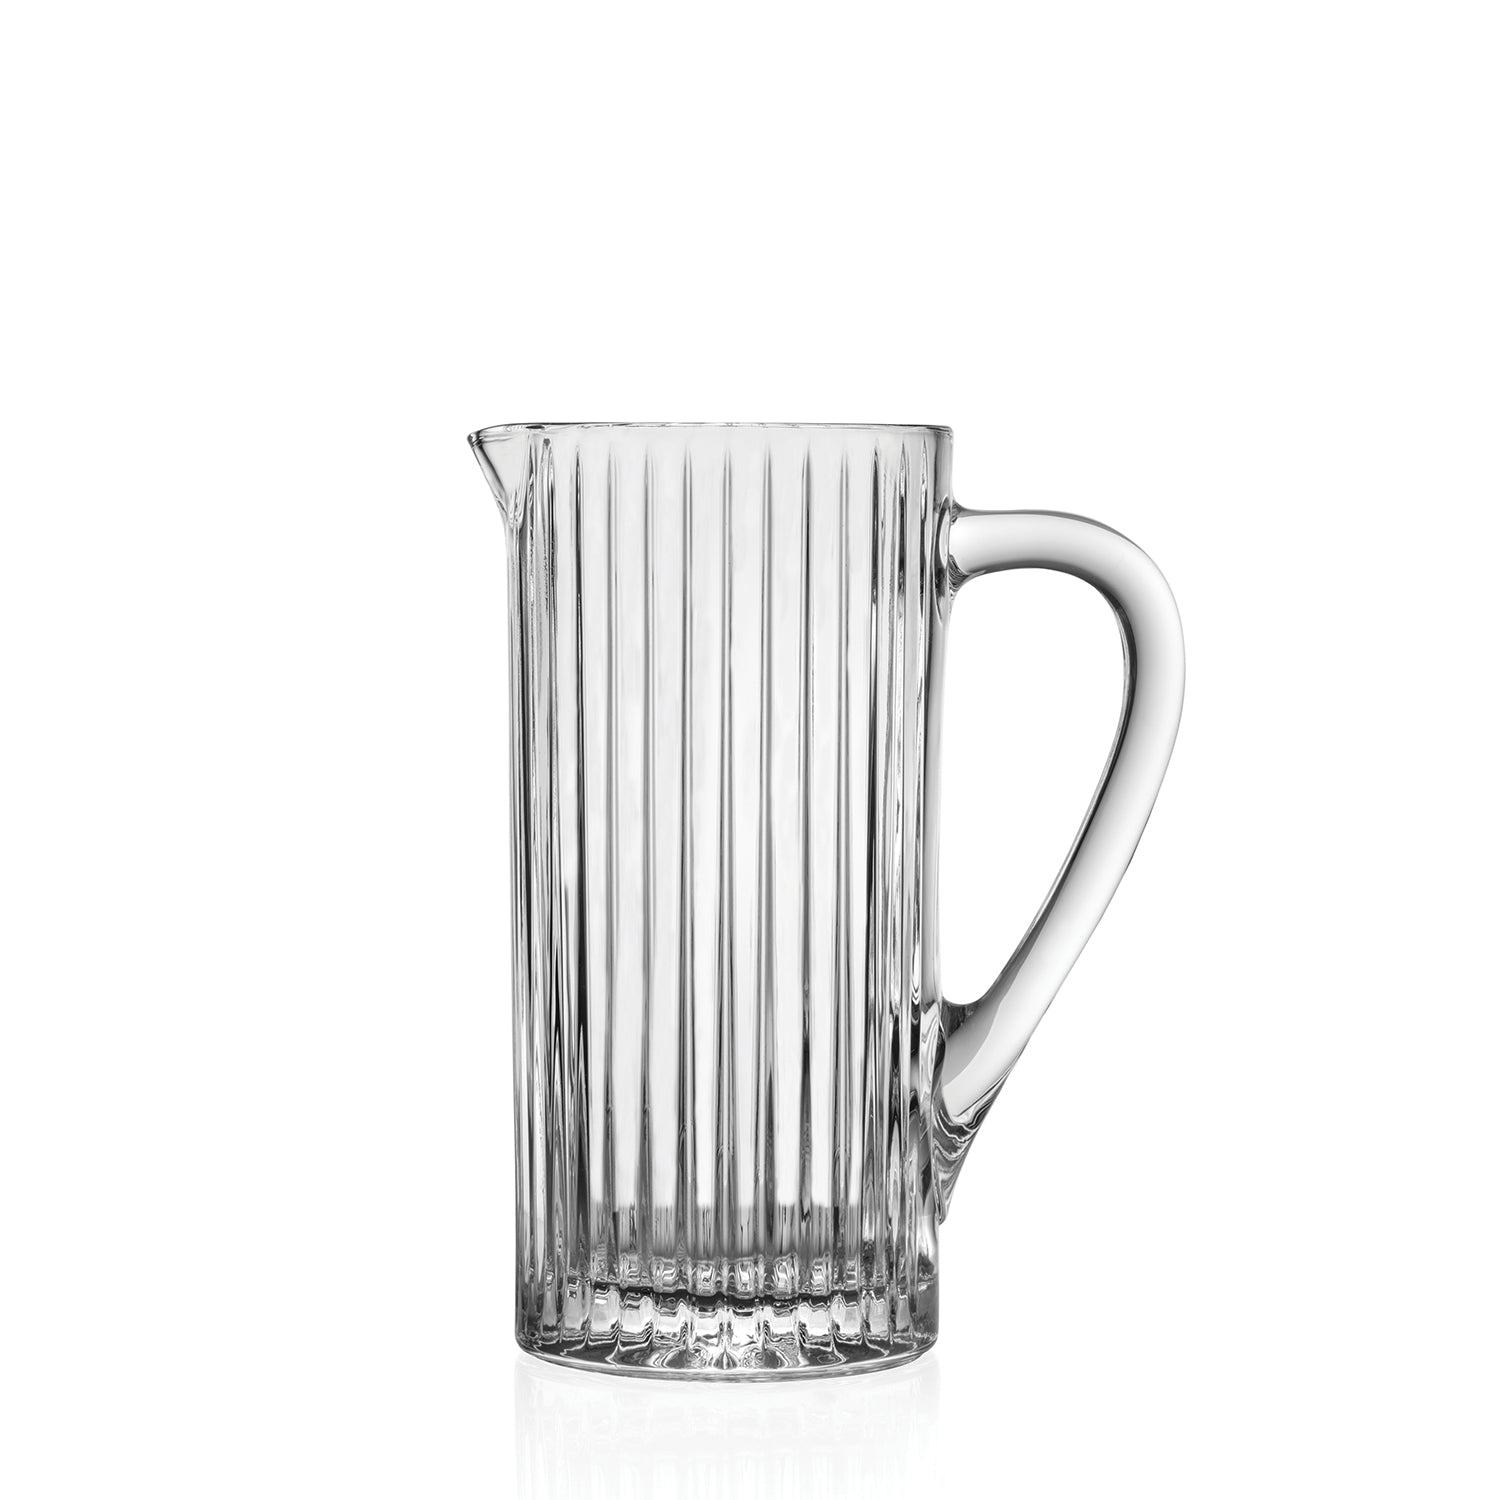 RCR (Made in Italy) Timeless Crystal Jug, 1200 ml, 1 Pc